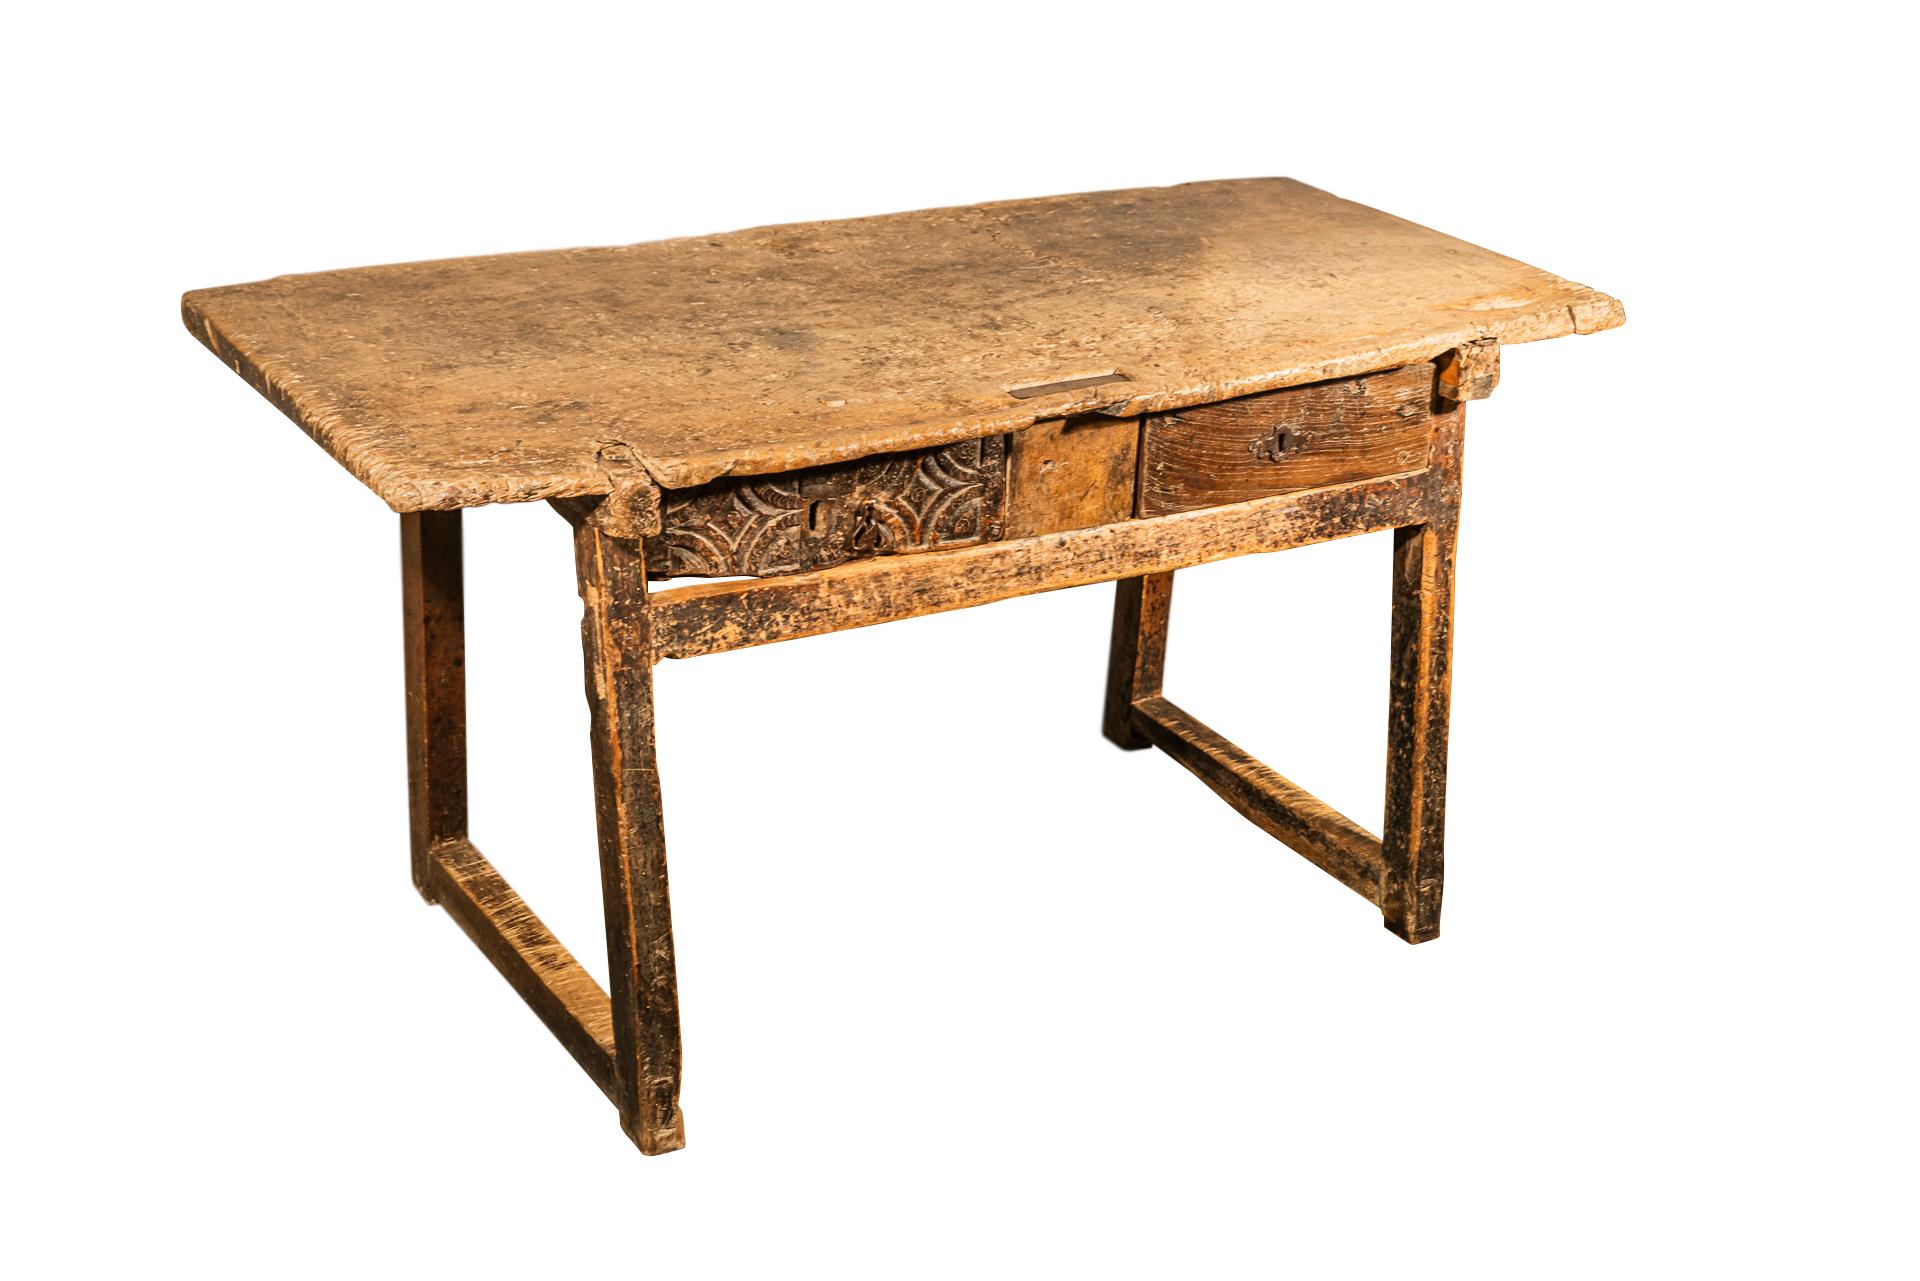 Brutalist table with two drawers, 
Wood, patina and wear consistent with artisanal use, accidents and losses, 
vintage condition, 
Spain, late 18th century.

Measures: Width 138 cm, height 70.5 cm, depth 62 cm.